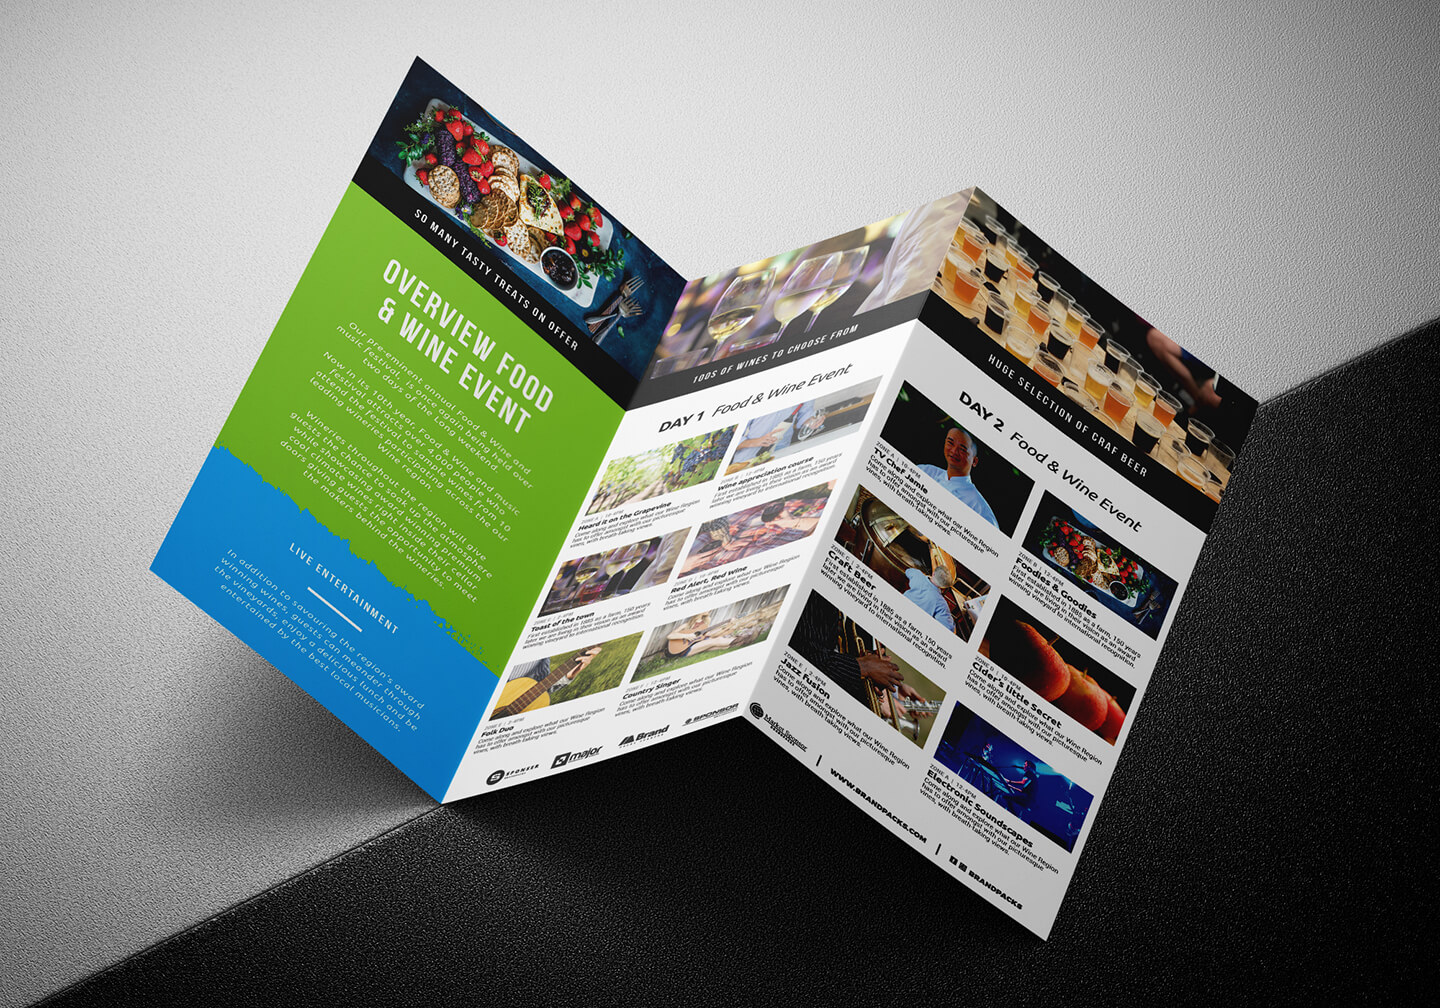 Free Tri Fold Brochure Template For Events & Festivals – Psd With Regard To Tri Fold Brochure Template Illustrator Free